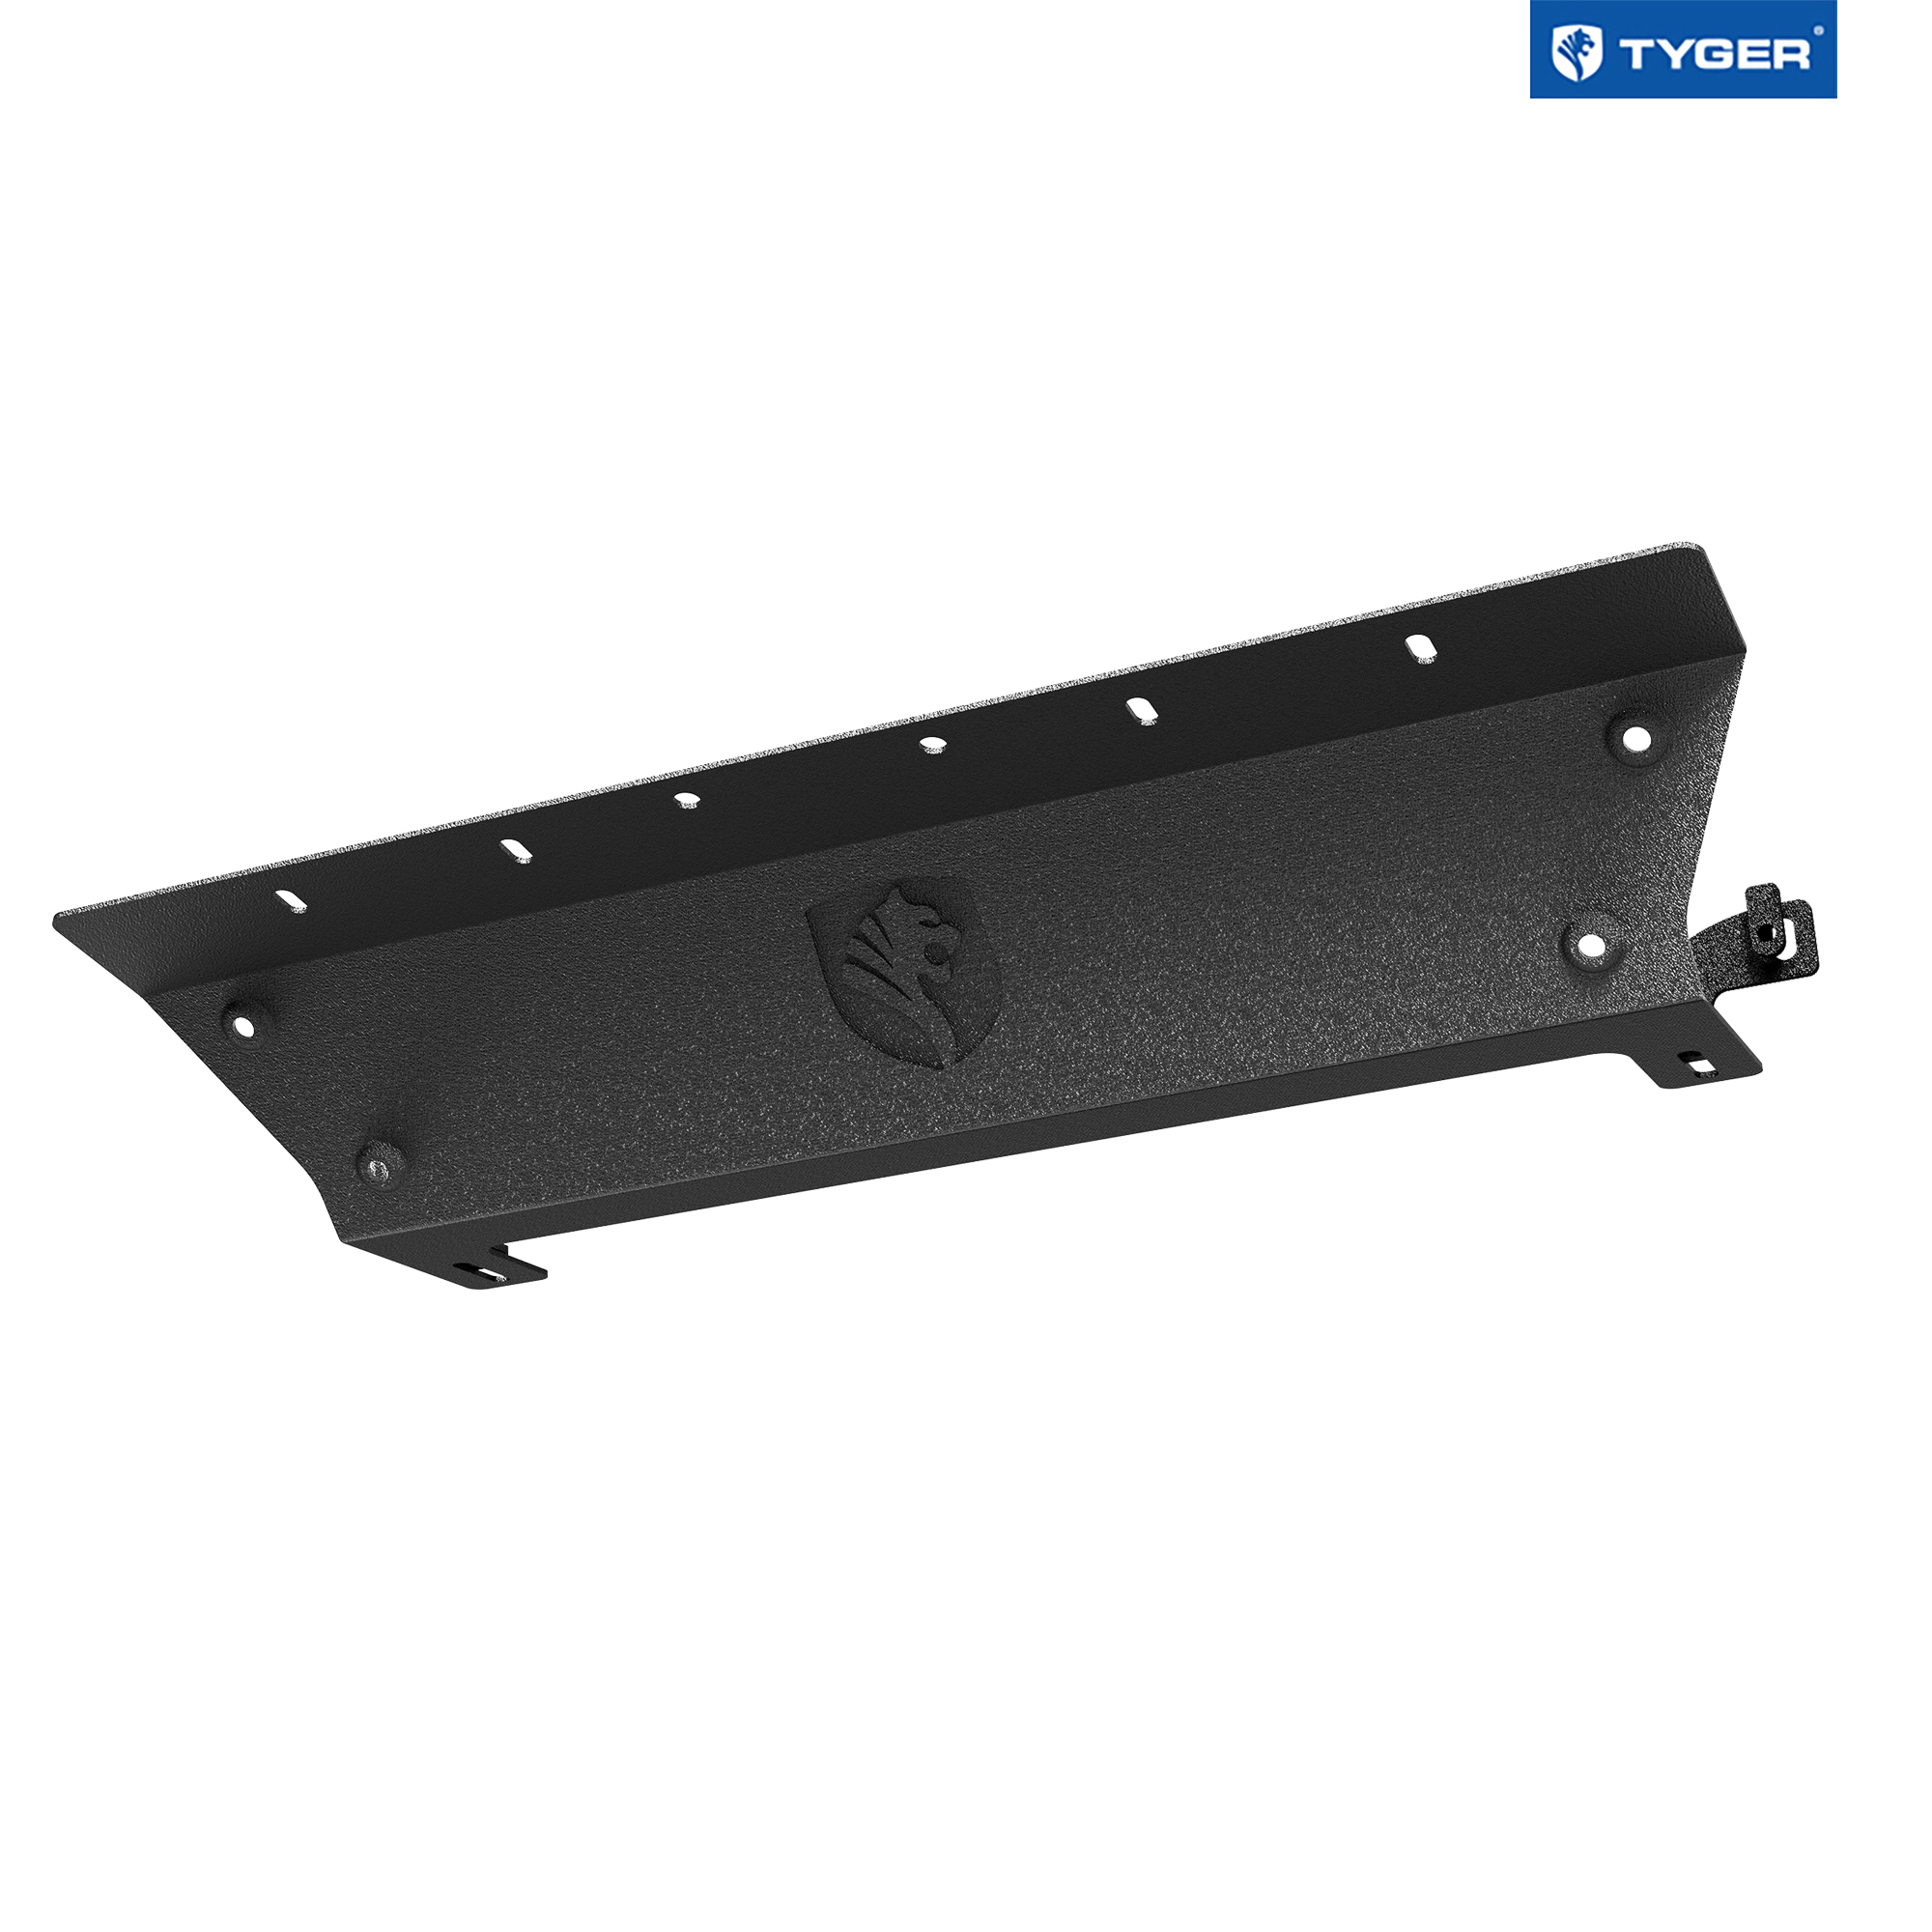 Skid Plate Works Only with TG-BP6J70078 | Textured Black